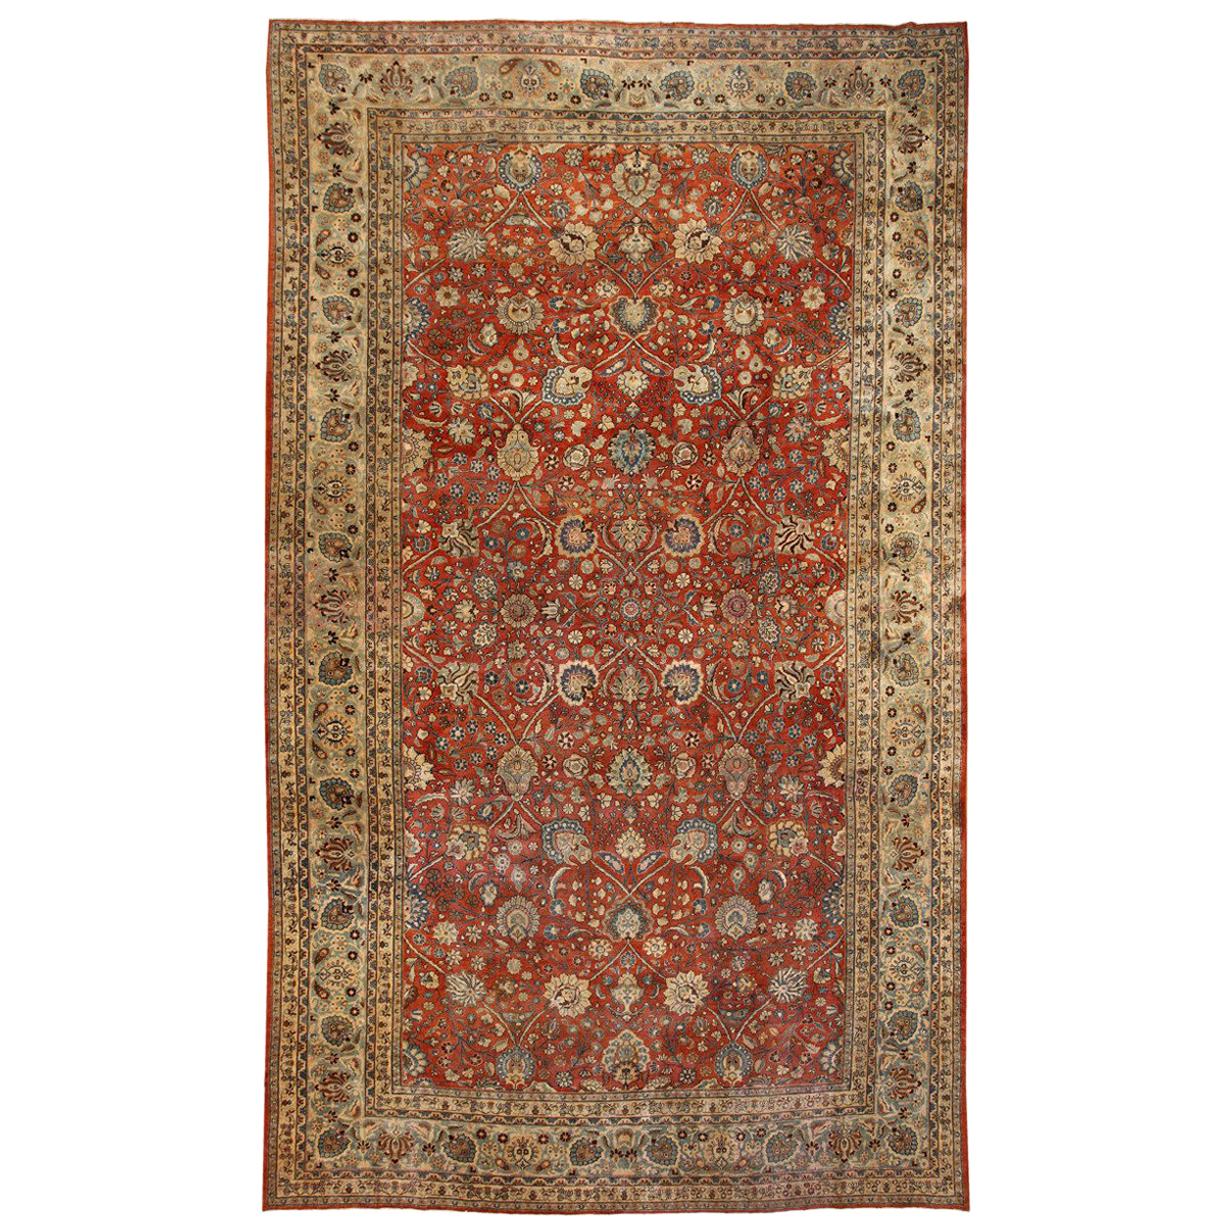 Antique Tabriz Persian Carpet. Size: 11 ft 2 in x 18 ft 6 in